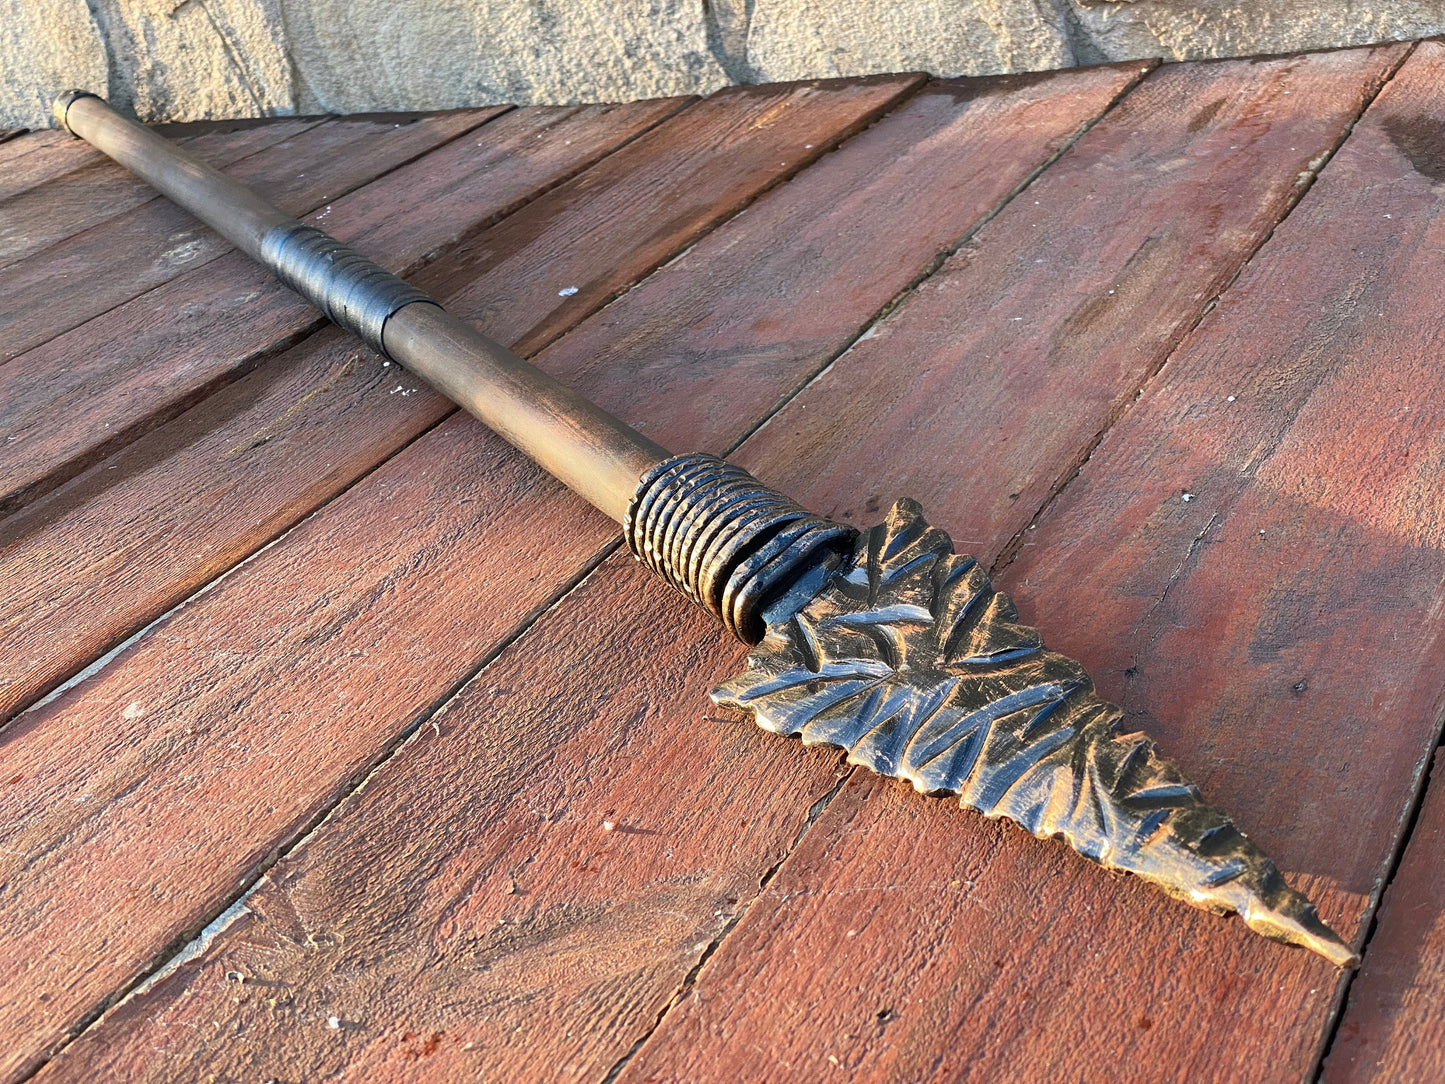 Viking spear, medieval spear, spear, birthday, viking, castle, Middle Ages, Christmas, gift for men, anniversary, personalized gift, trident